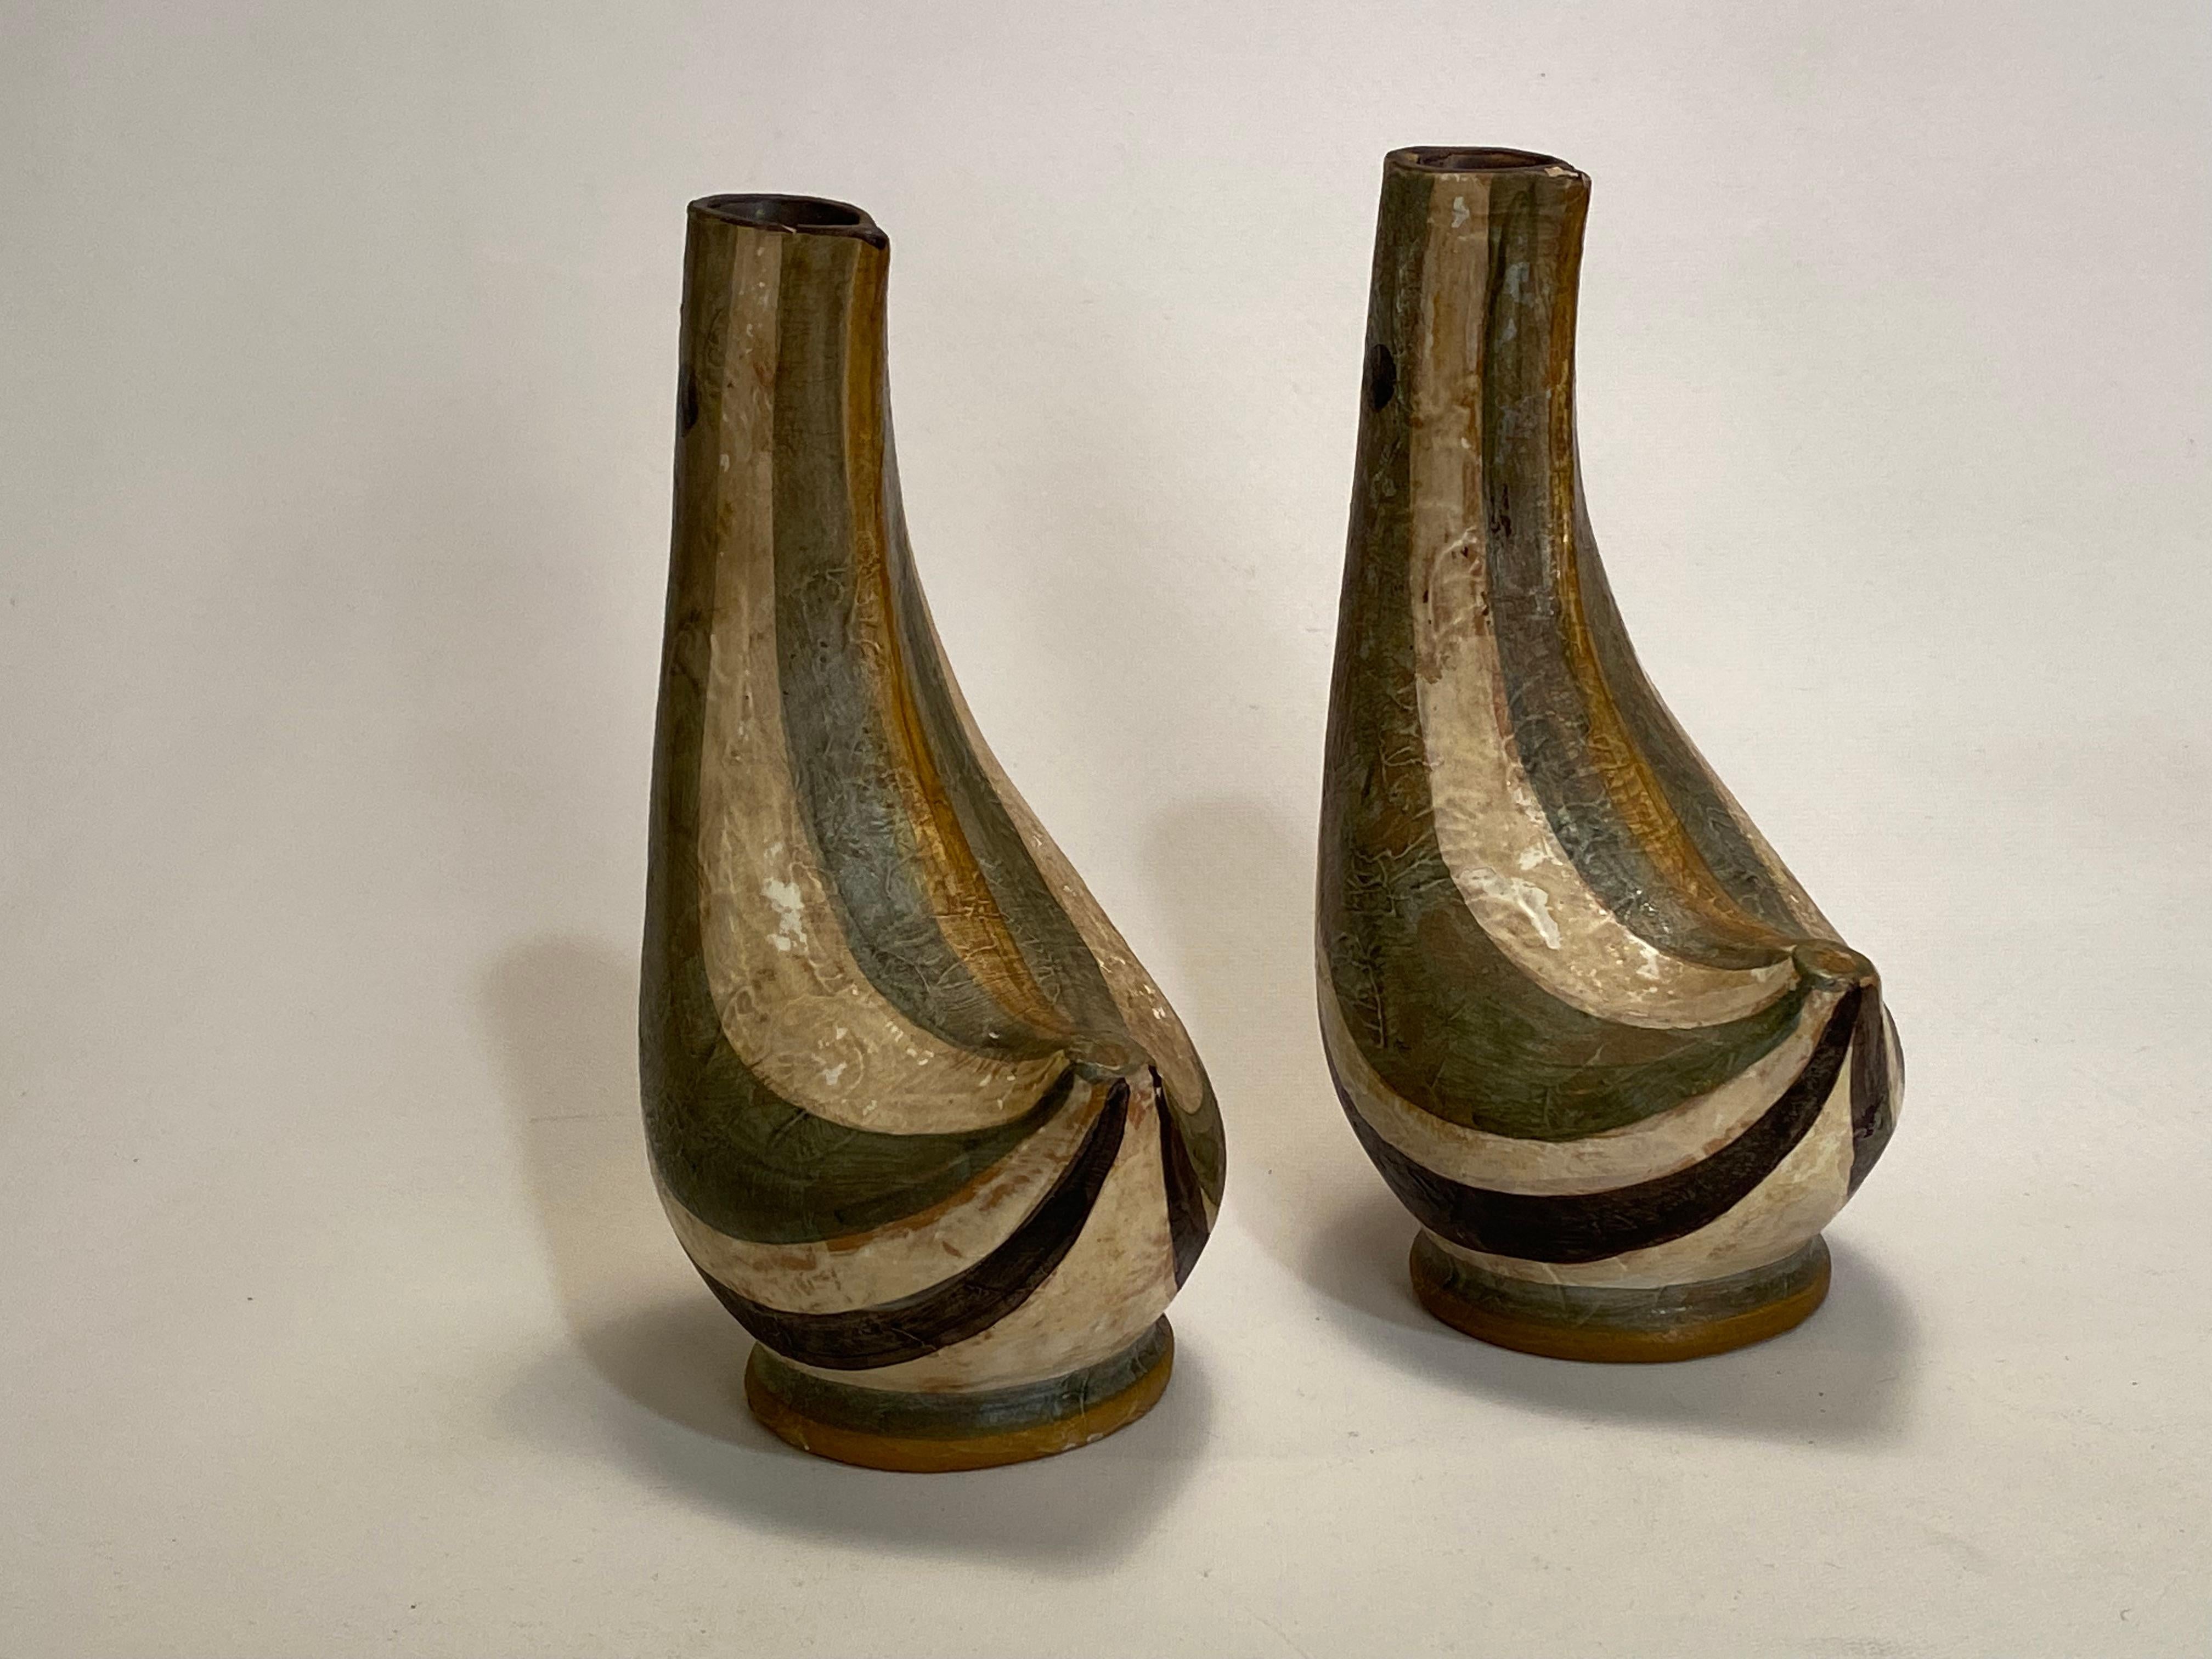 A fine pair of handmade Bitossi art pottery stylized bird vases. Great muted color palette of an olive green, black and white glazes. The finger print by the bird's eye is truly remarkable trace of identification history. Circa 1950-60. Good overall